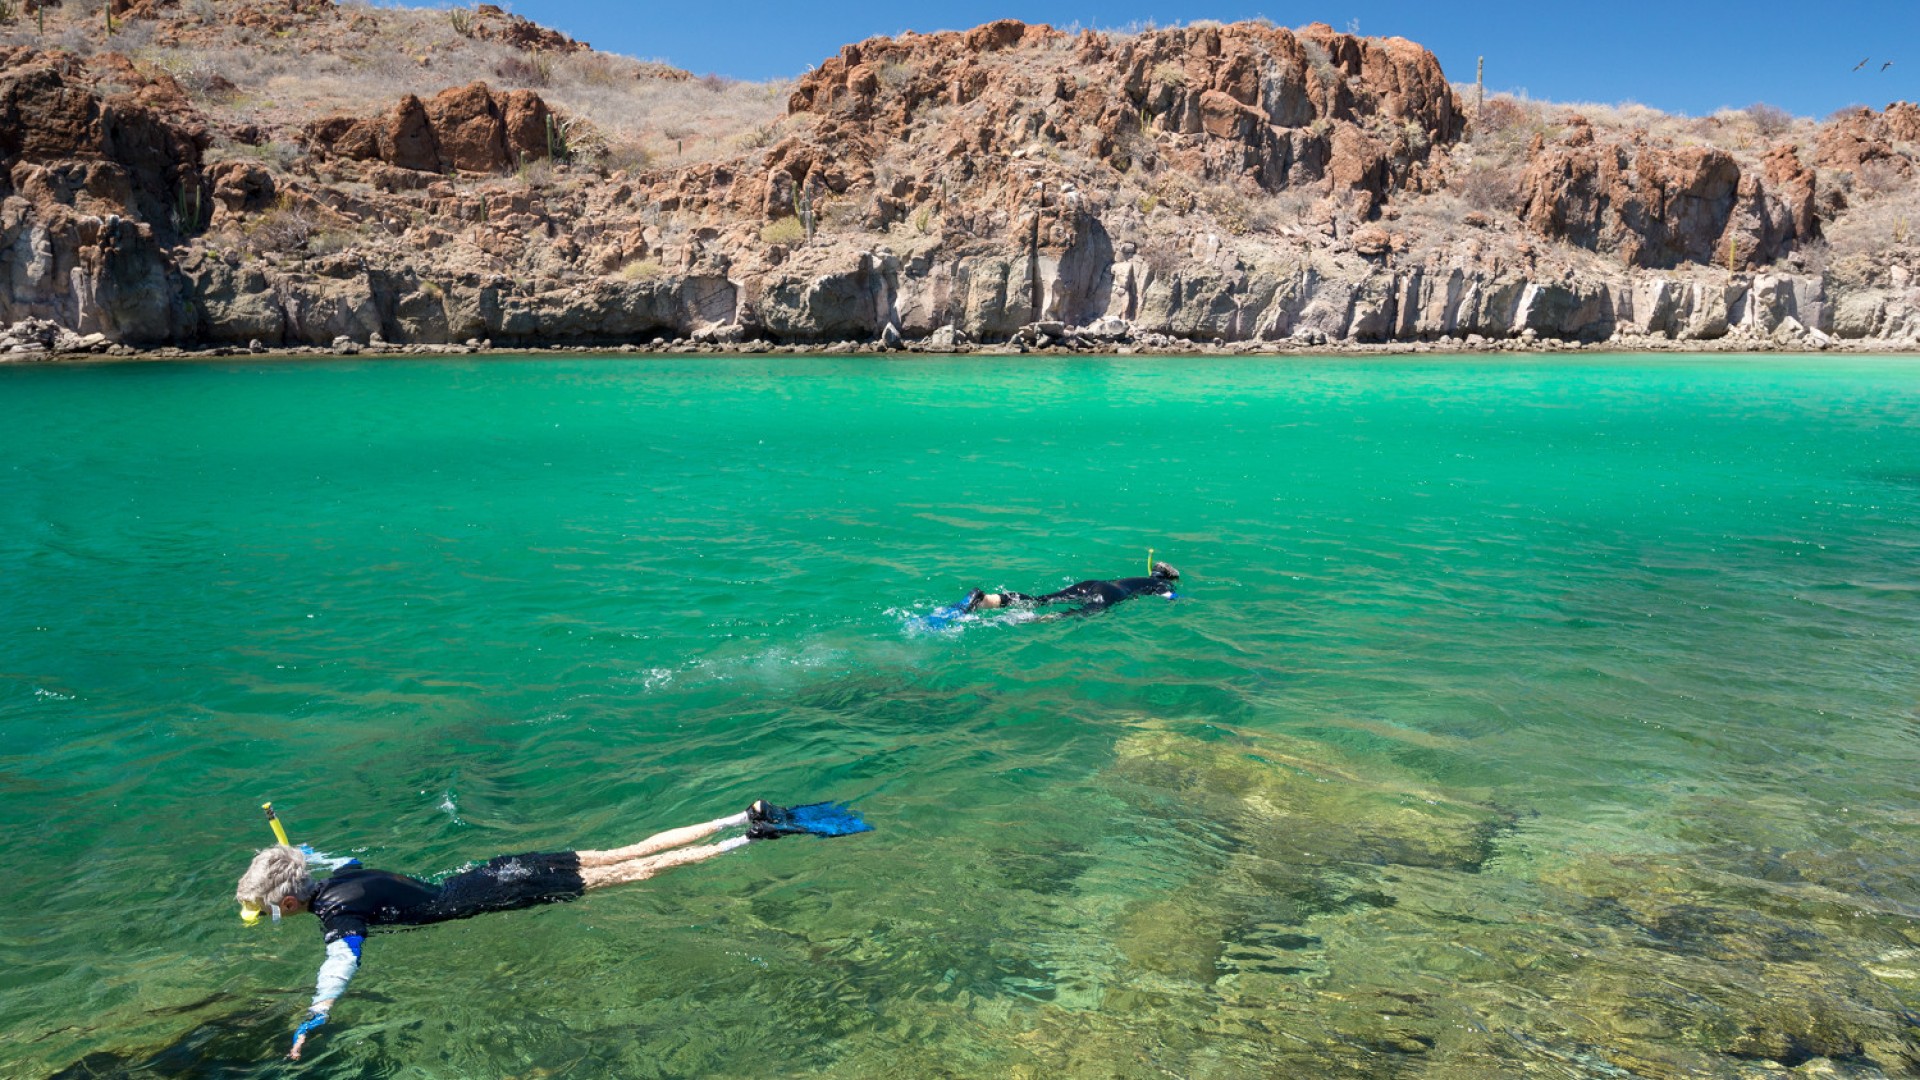 Person snorkeling in the turquoise waters of the Sea of Cortez on a sunny day